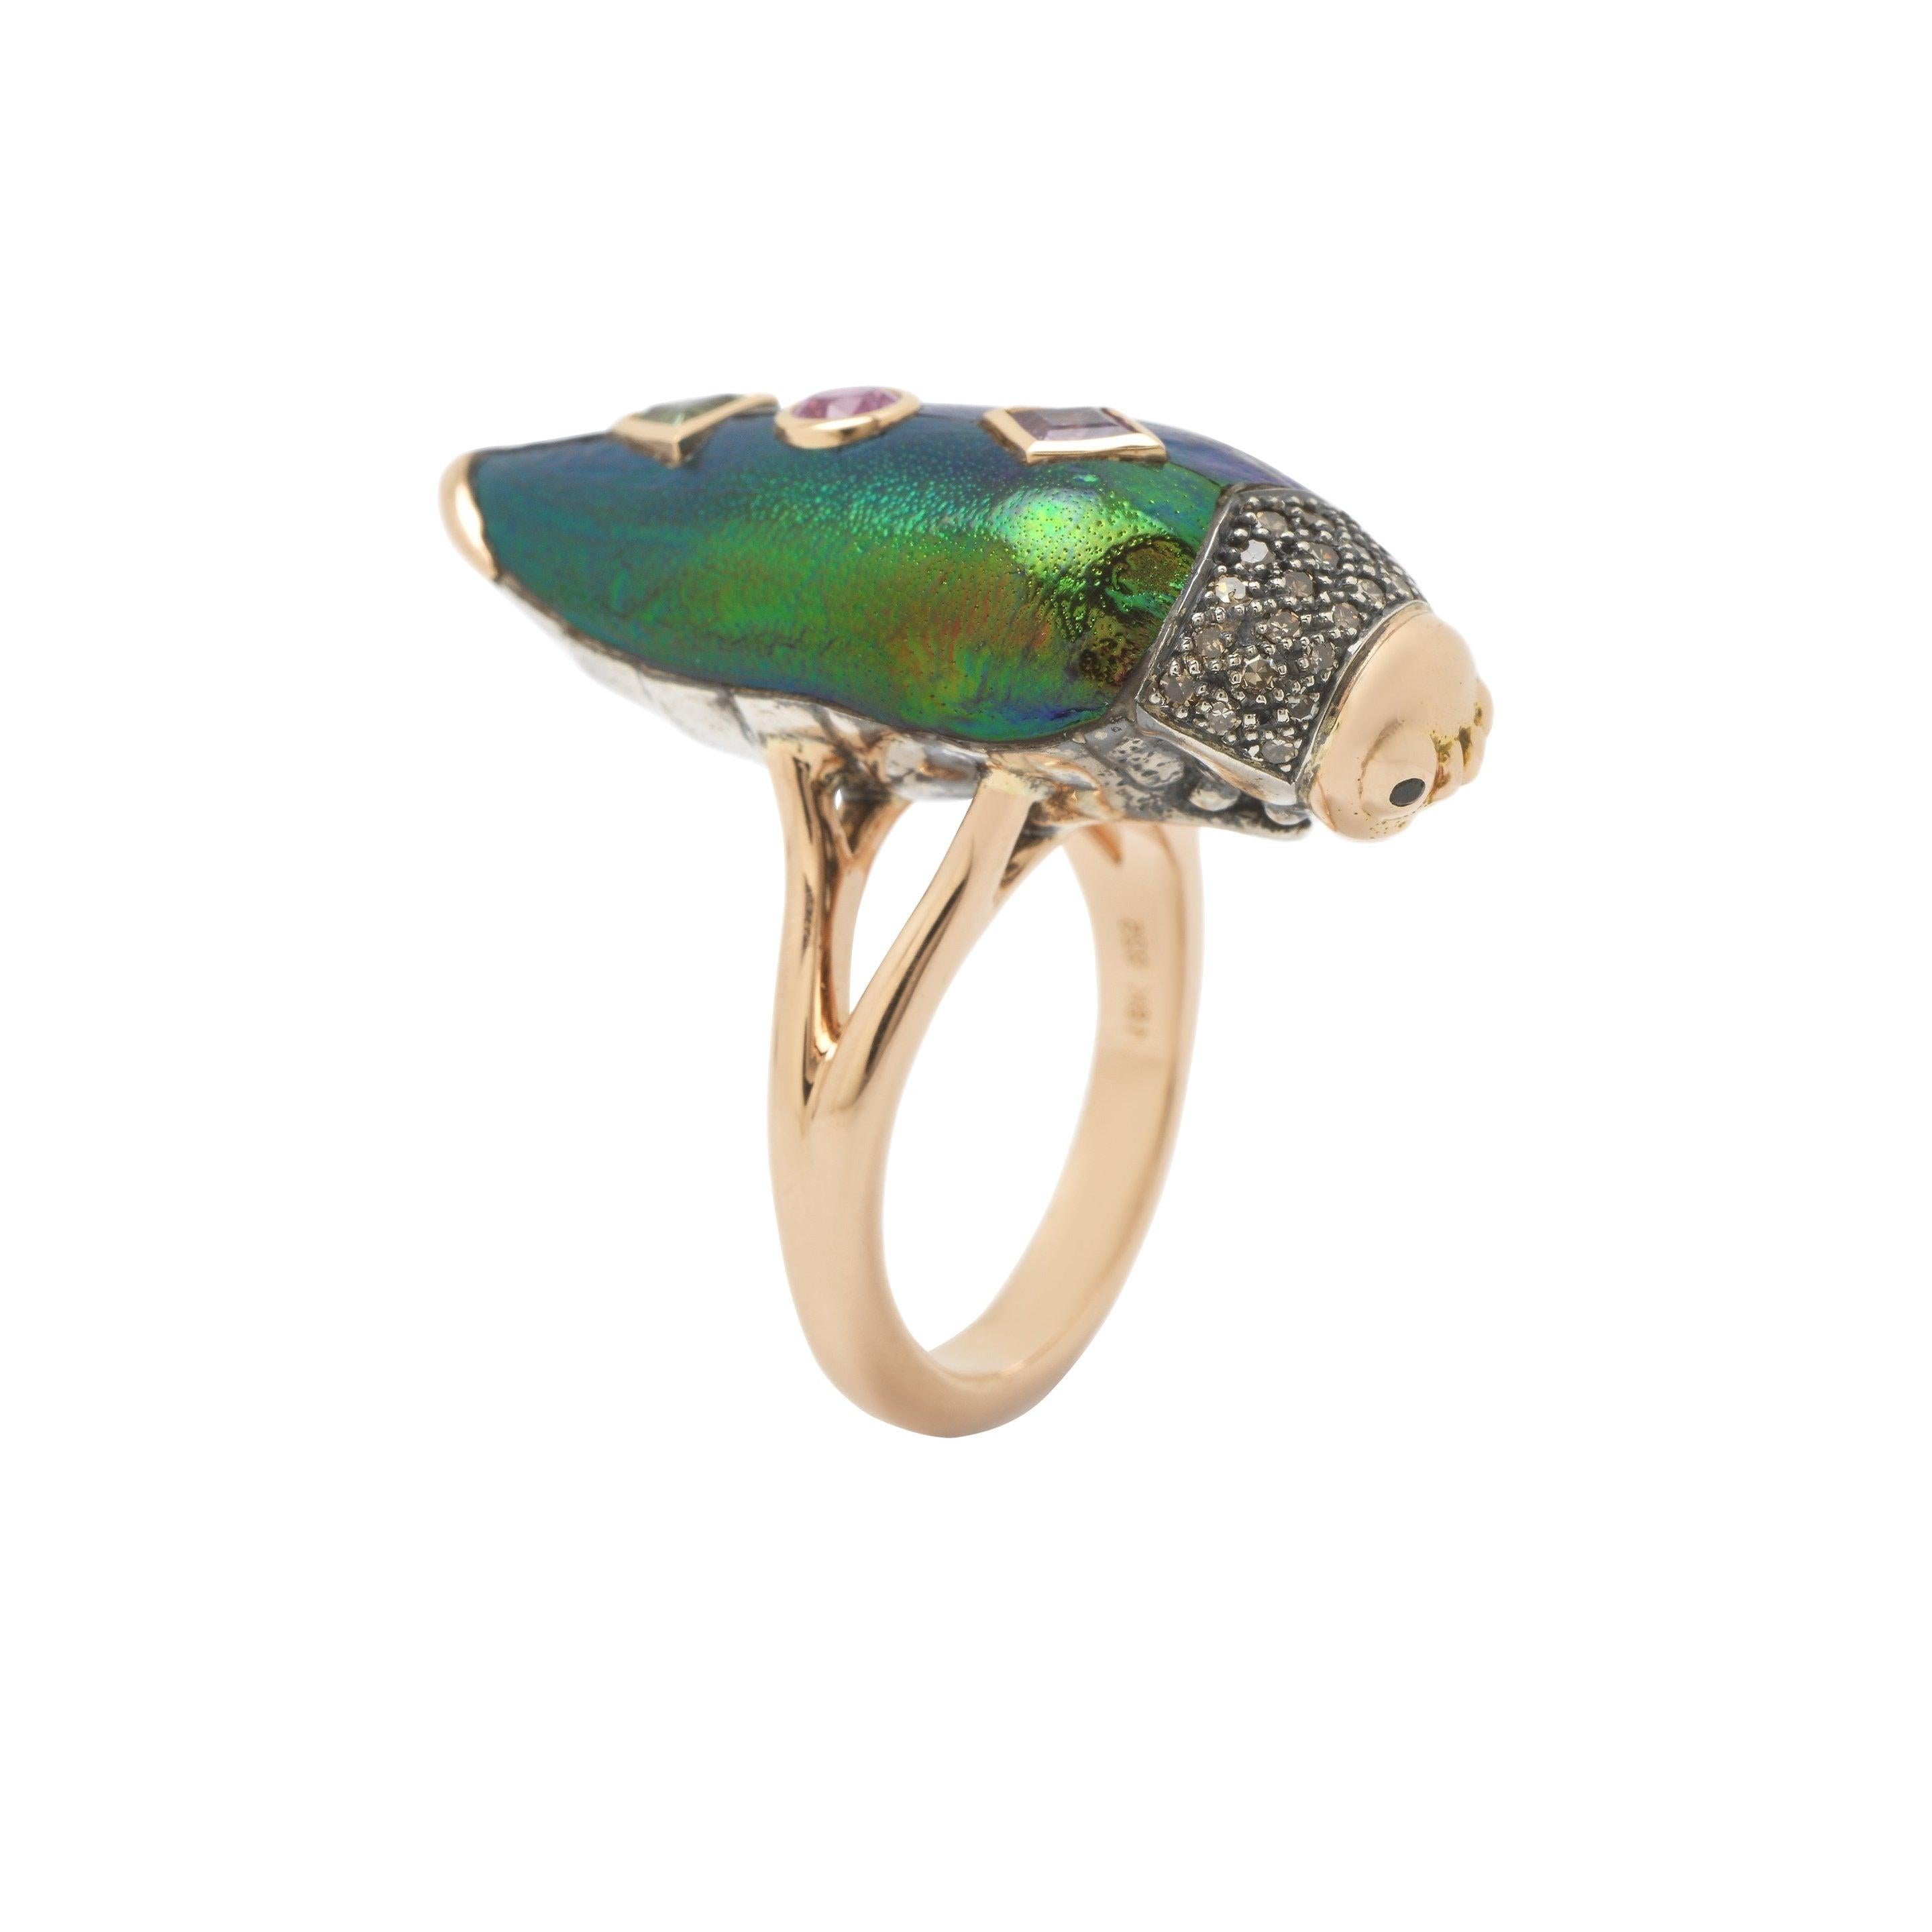 The Scarab beetle has long been prized as an auspicious symbol, as far back as ancient Egyptian times. The Scarab Pop Art Ring is Bibi’s modern take on this sacred amulet. The ring is crafted in 18k rose gold and sterling silver and set with a real